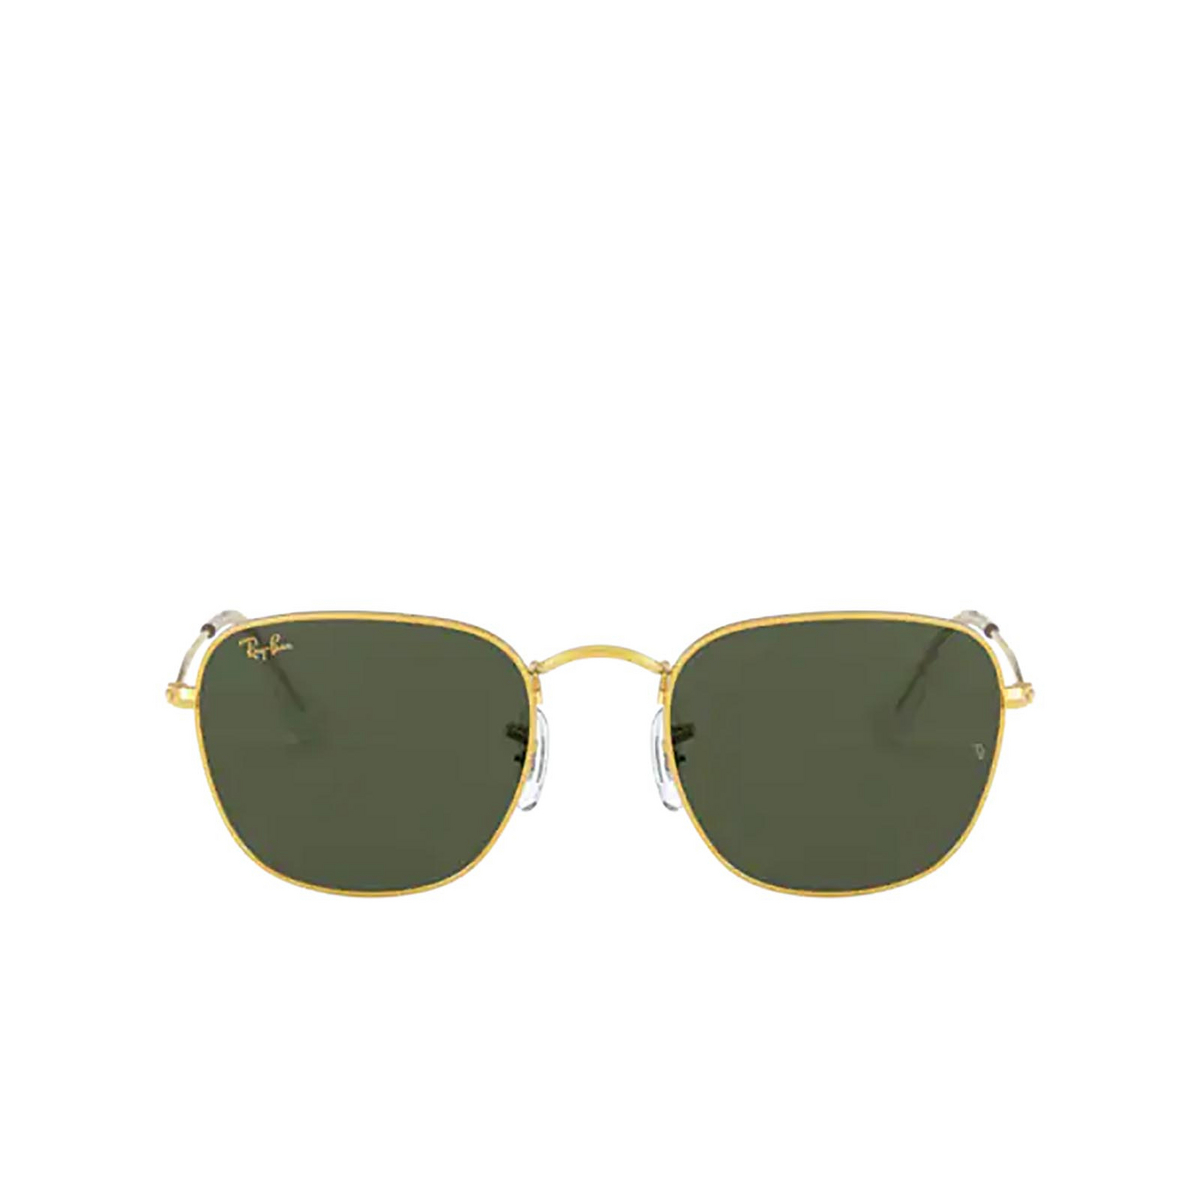 Ray-Ban FRANK Sunglasses 919631 LEGEND GOLD - front view